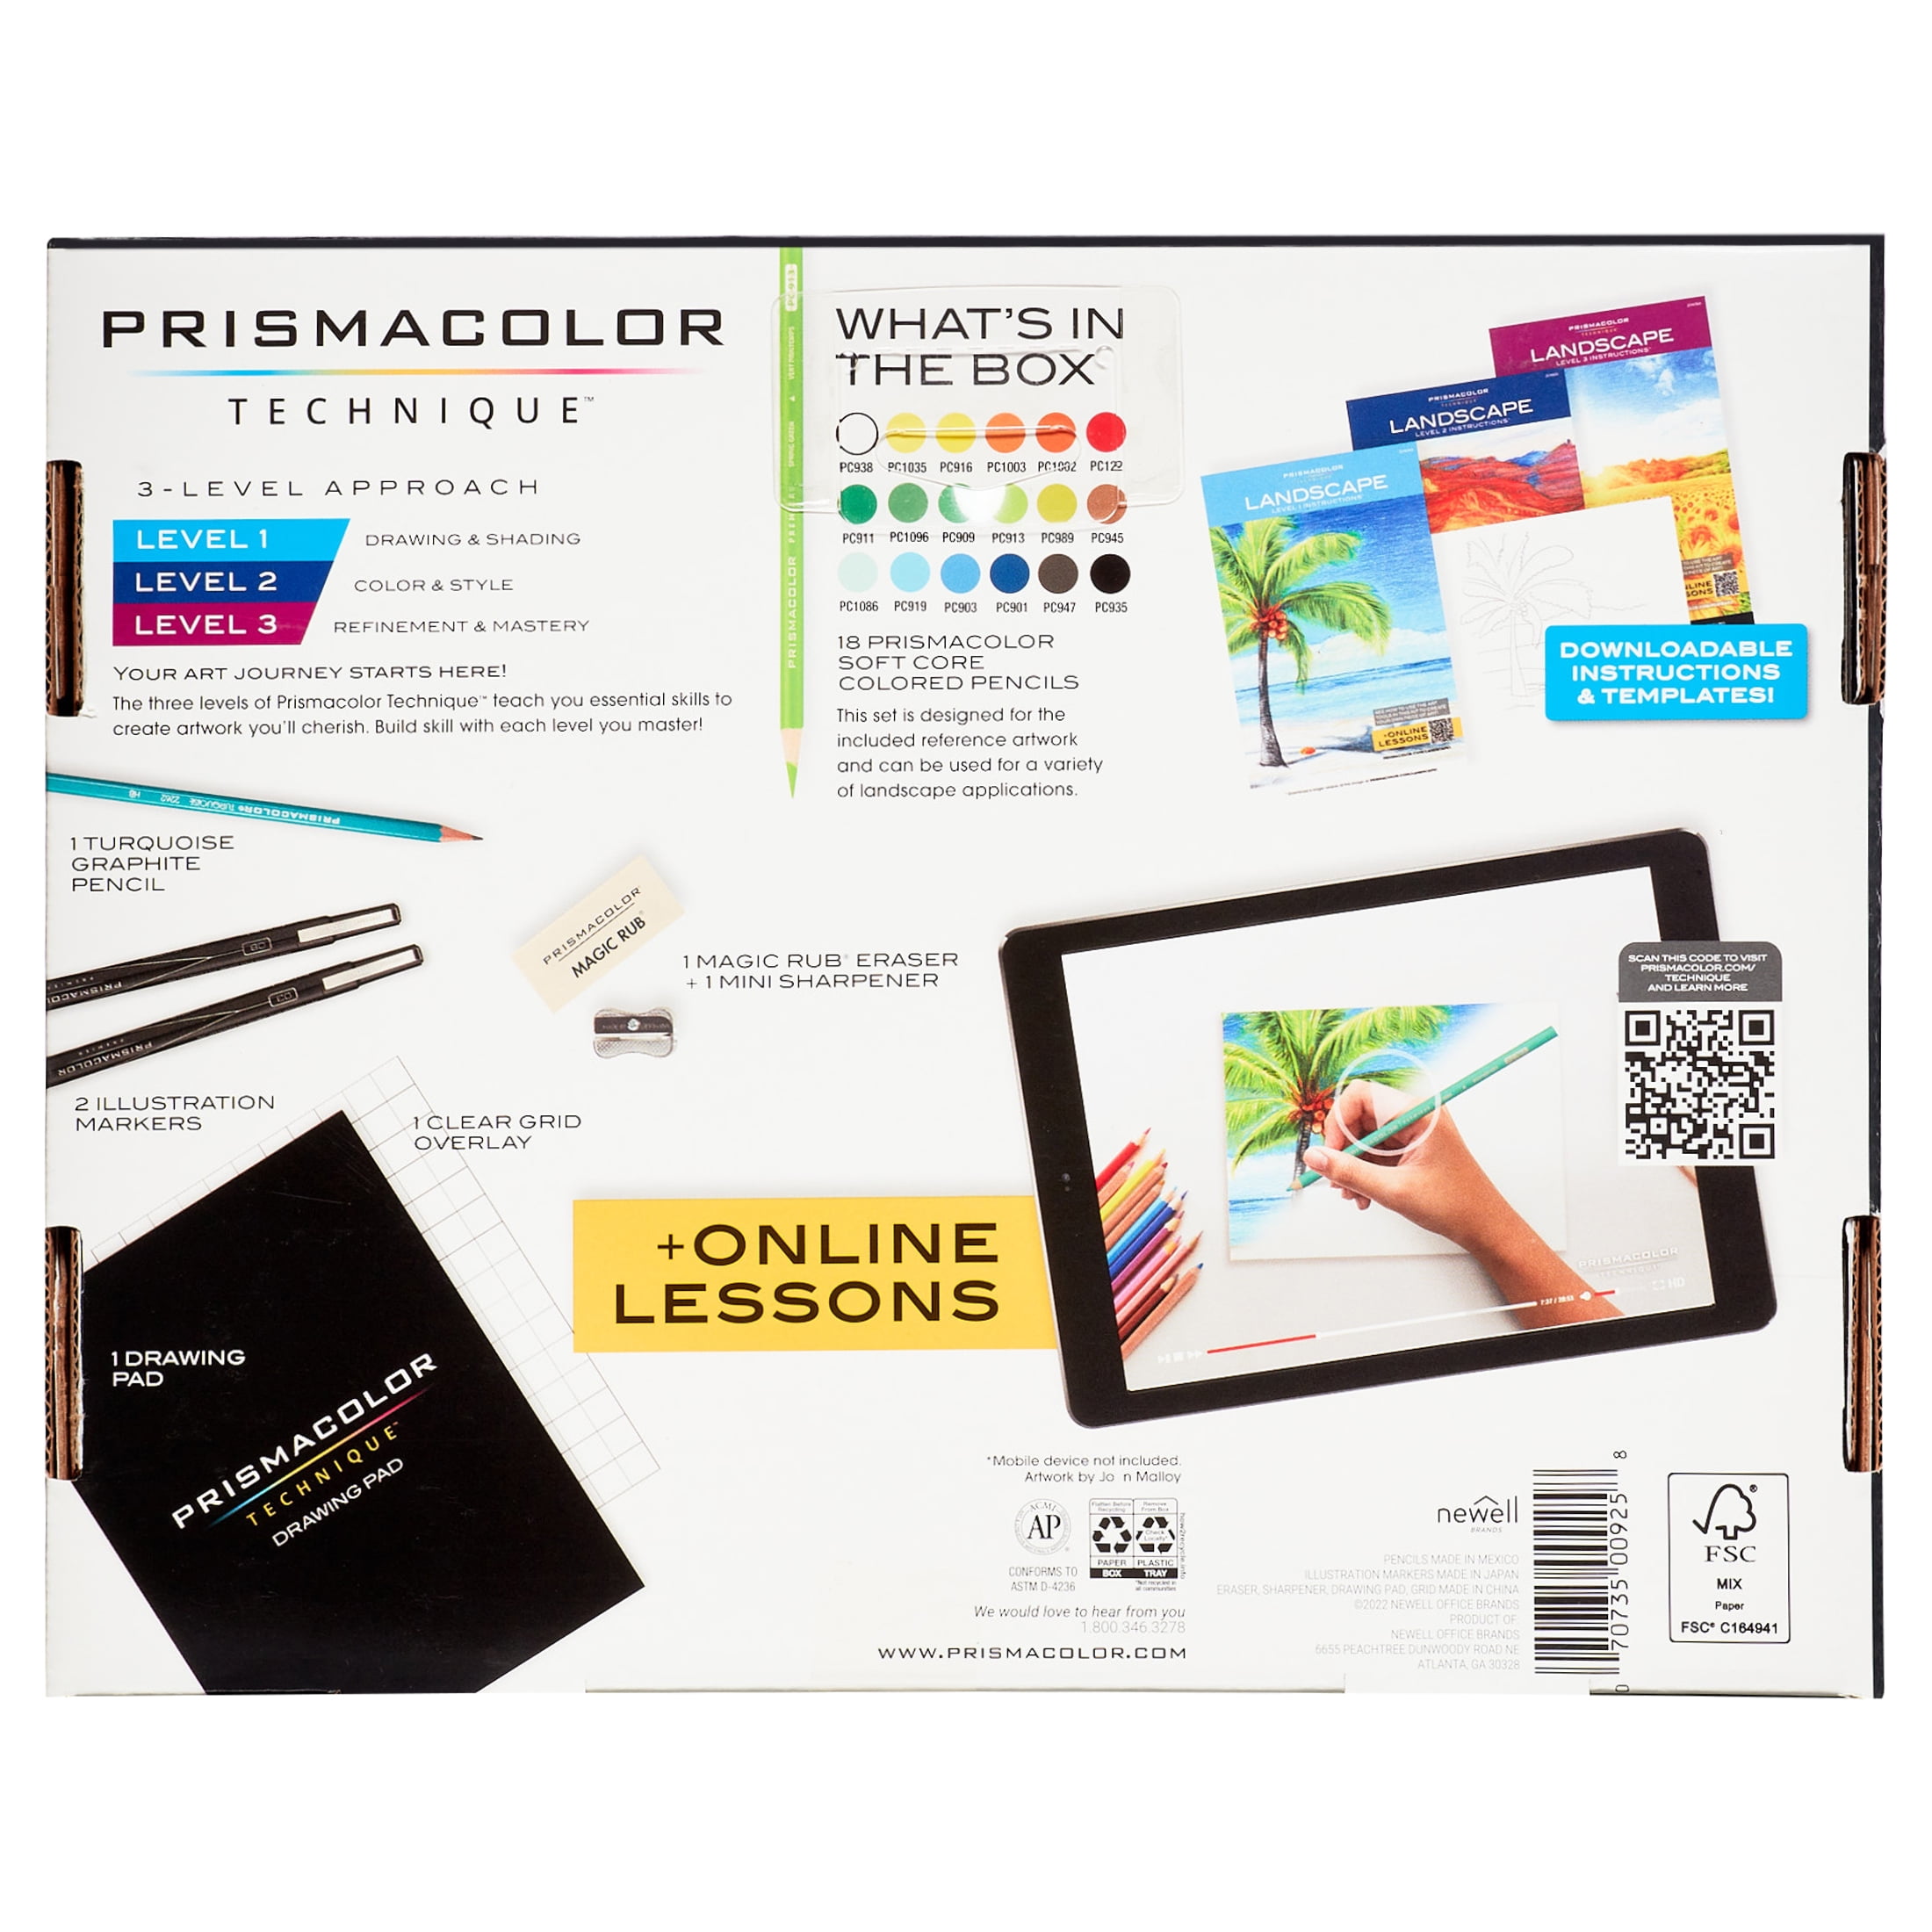 Kid to Kid on Instagram: Prismacolor technique drawing sets level 1-2&3  $25.99 just in time for Christmas 🎄